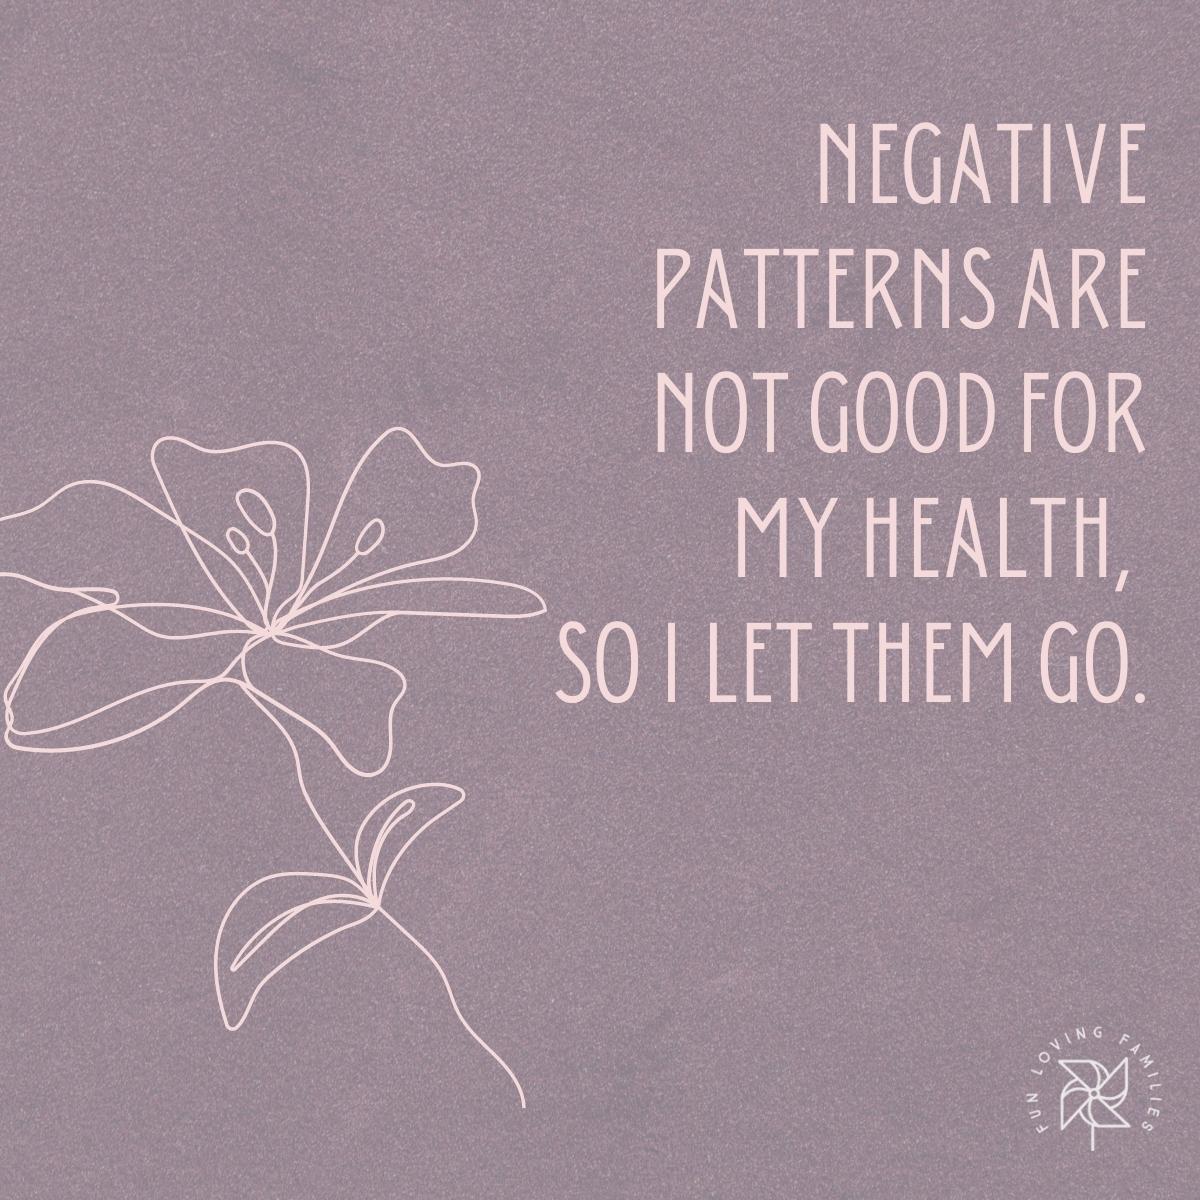 Negative patterns are not good for my health, so I let them go affirmation image